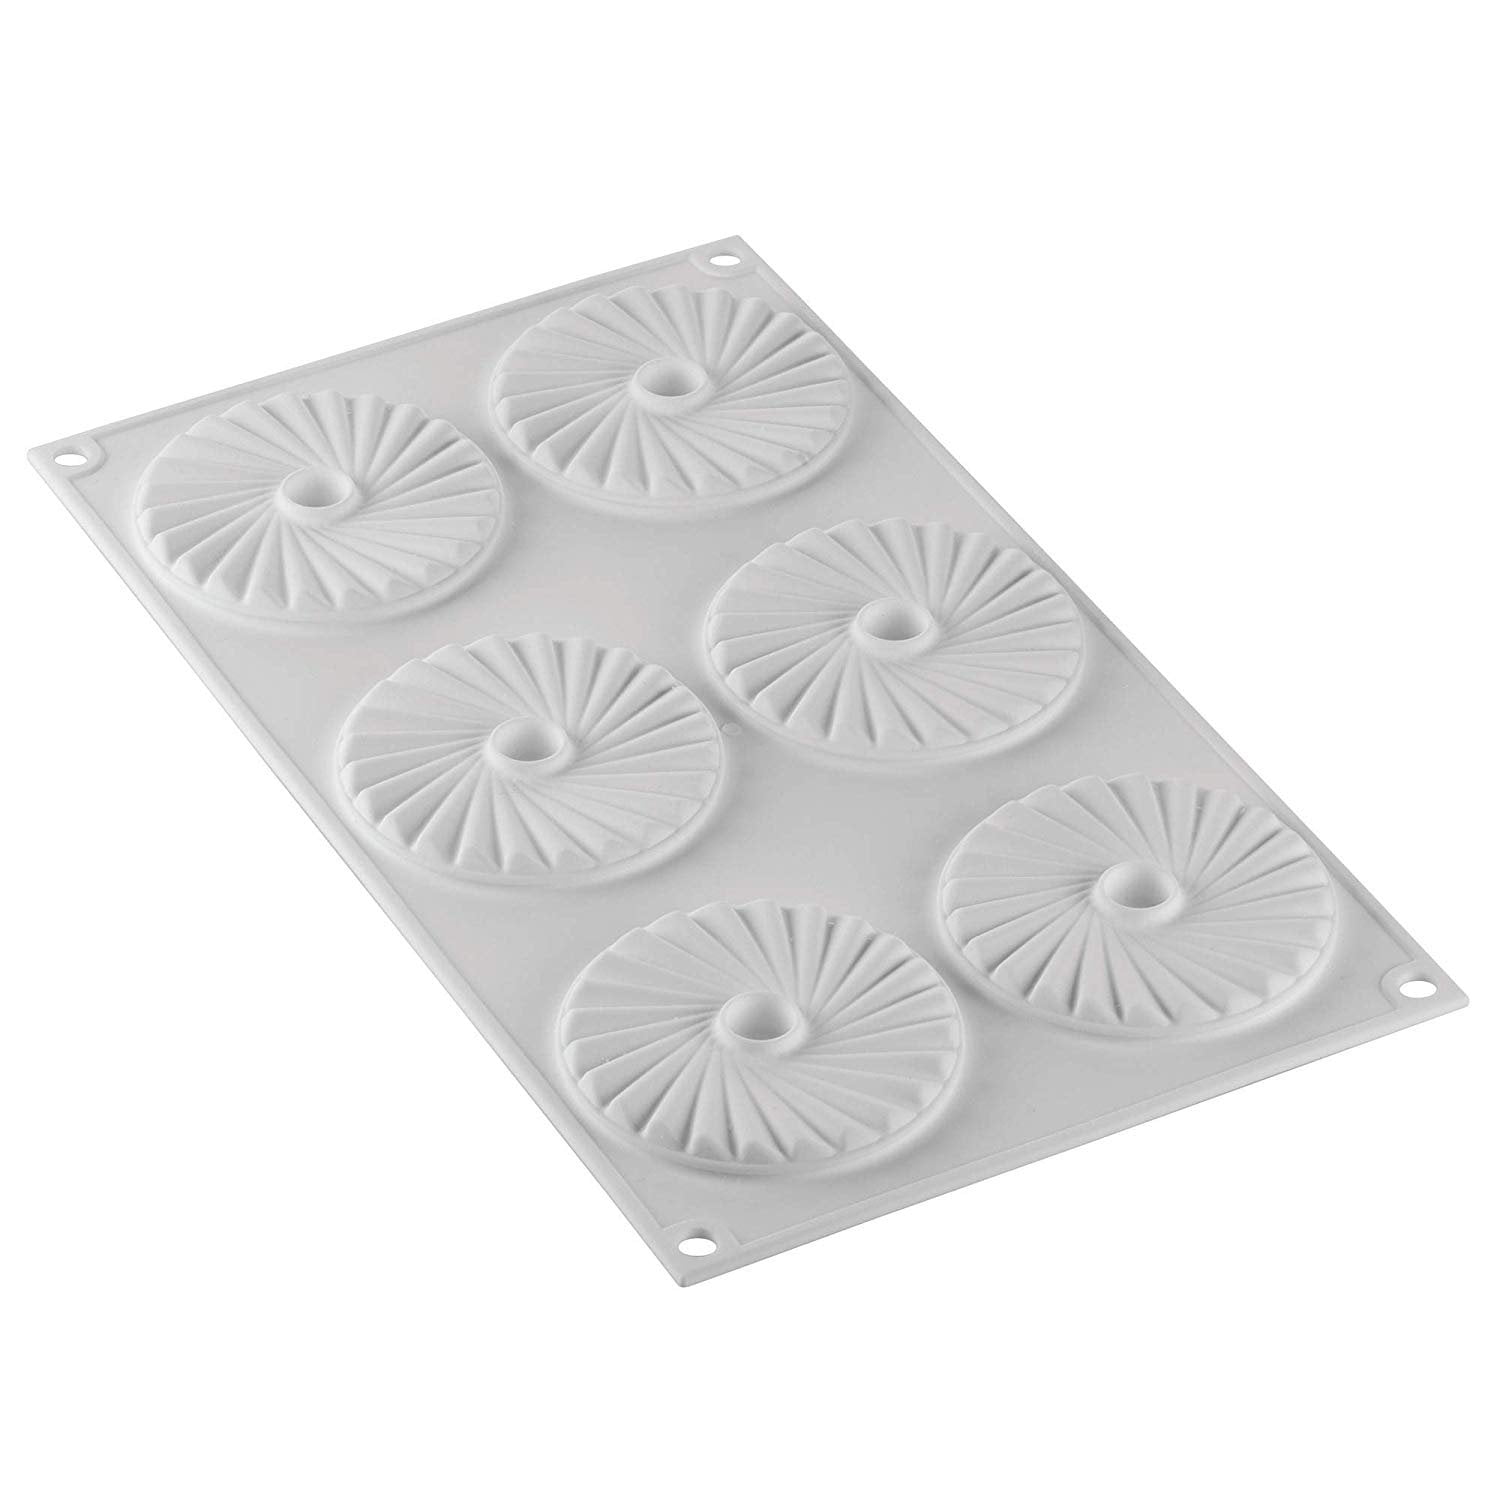 Silikomart Promise 65 Silicone Mold with 6 Cavities, Each 3.34 Inch  Diameter x 0.78 Inch High